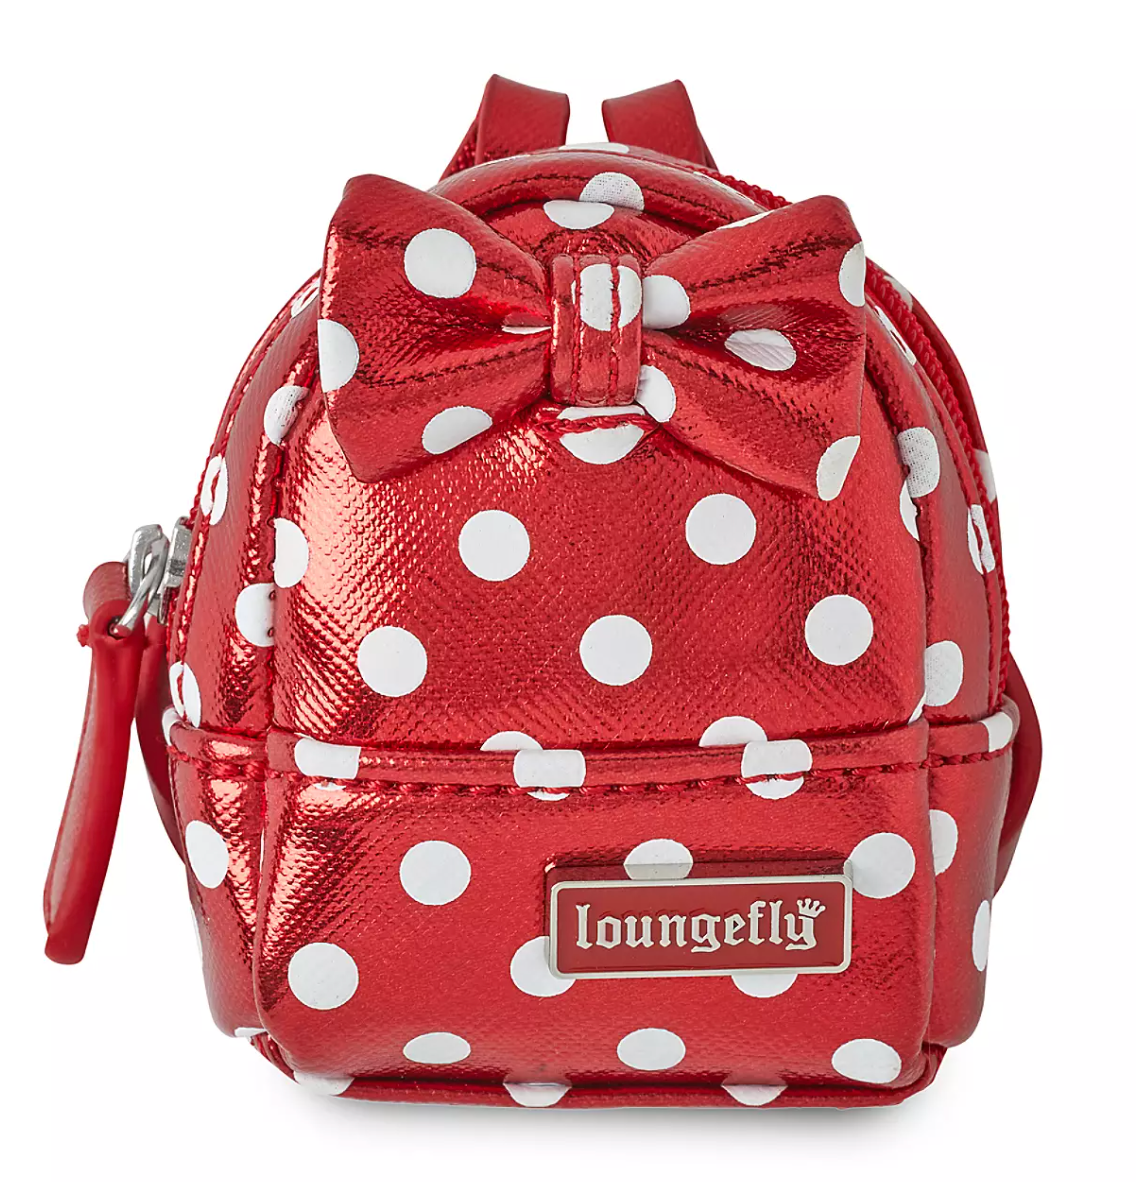 Disney Nuimos Collection Polka Dot Backpack New With Tag - image 1 of 3